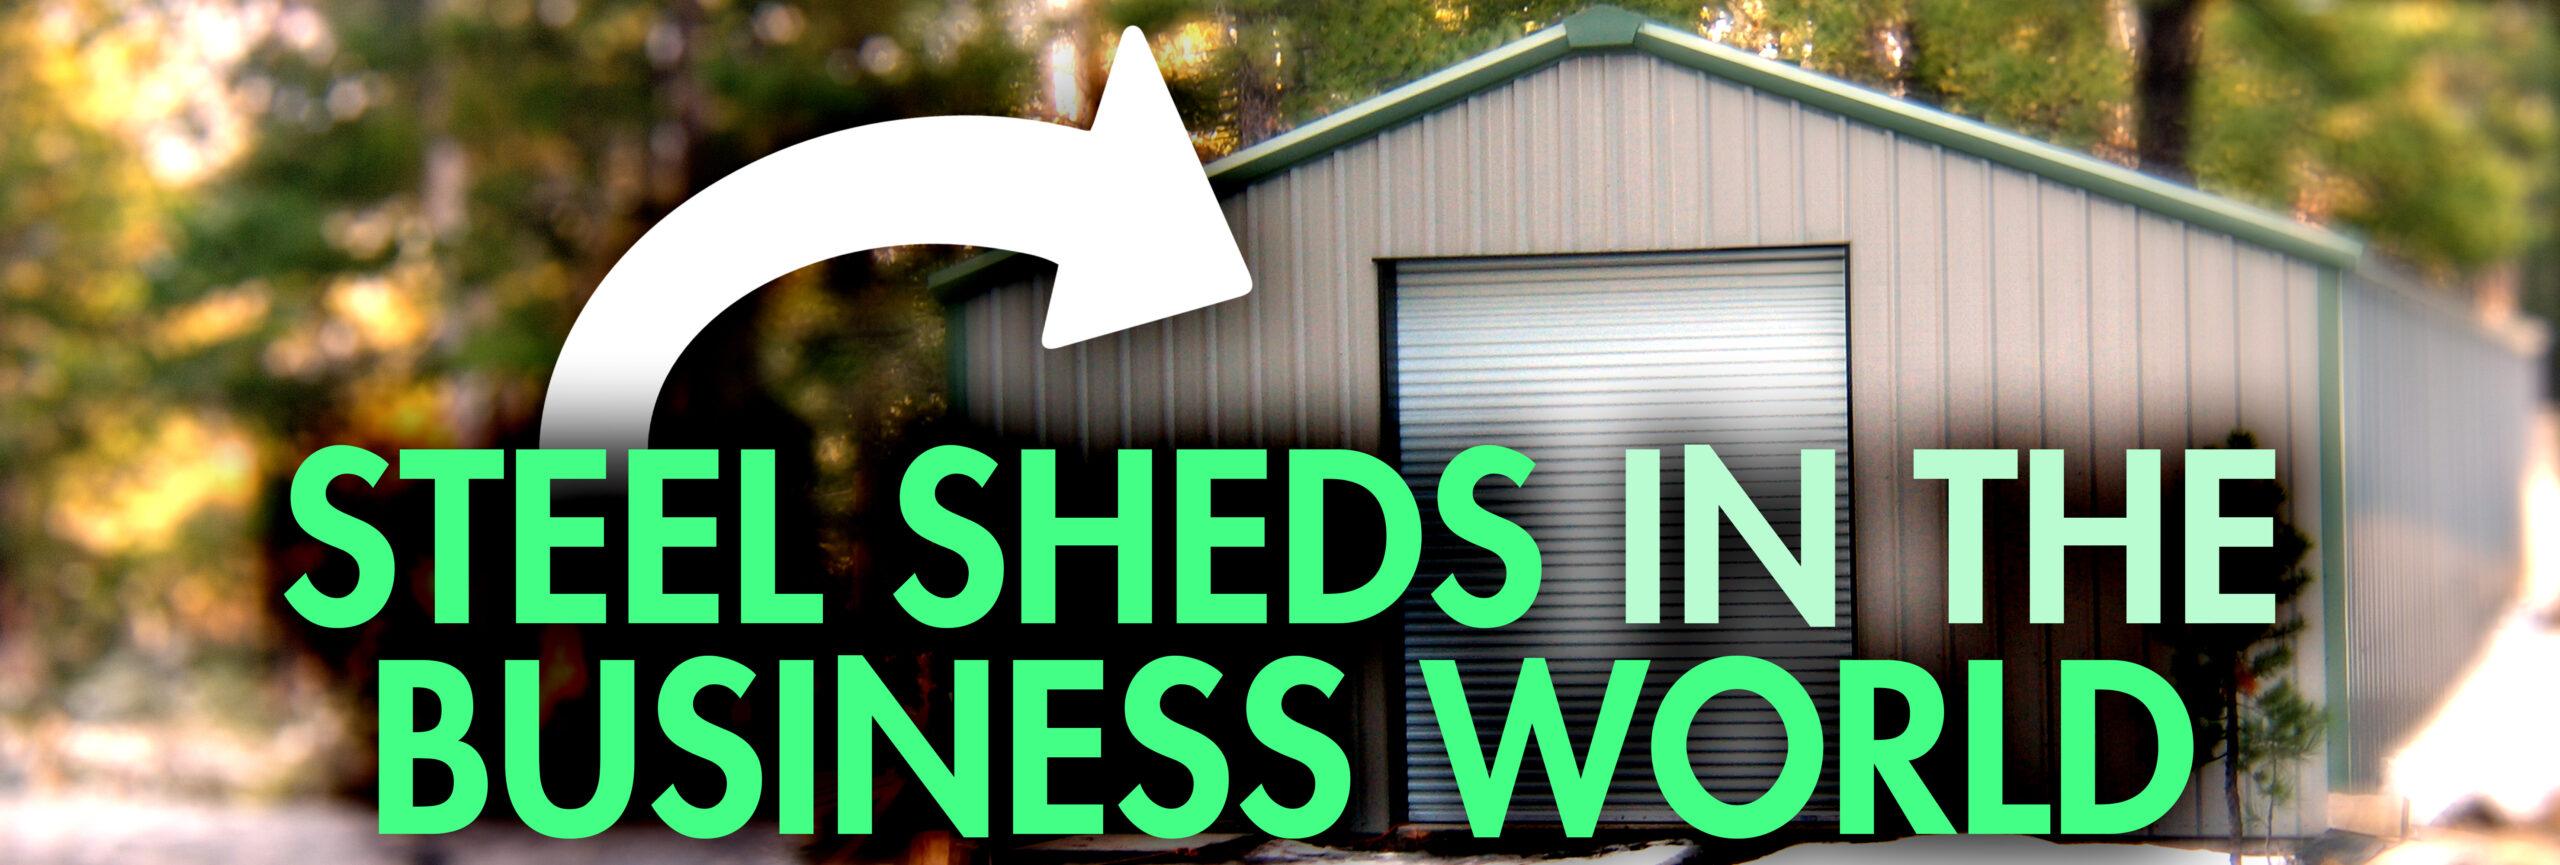 Versatility of Commercial Metal Sheds: How to Adapt Structures to Fit Business Needs